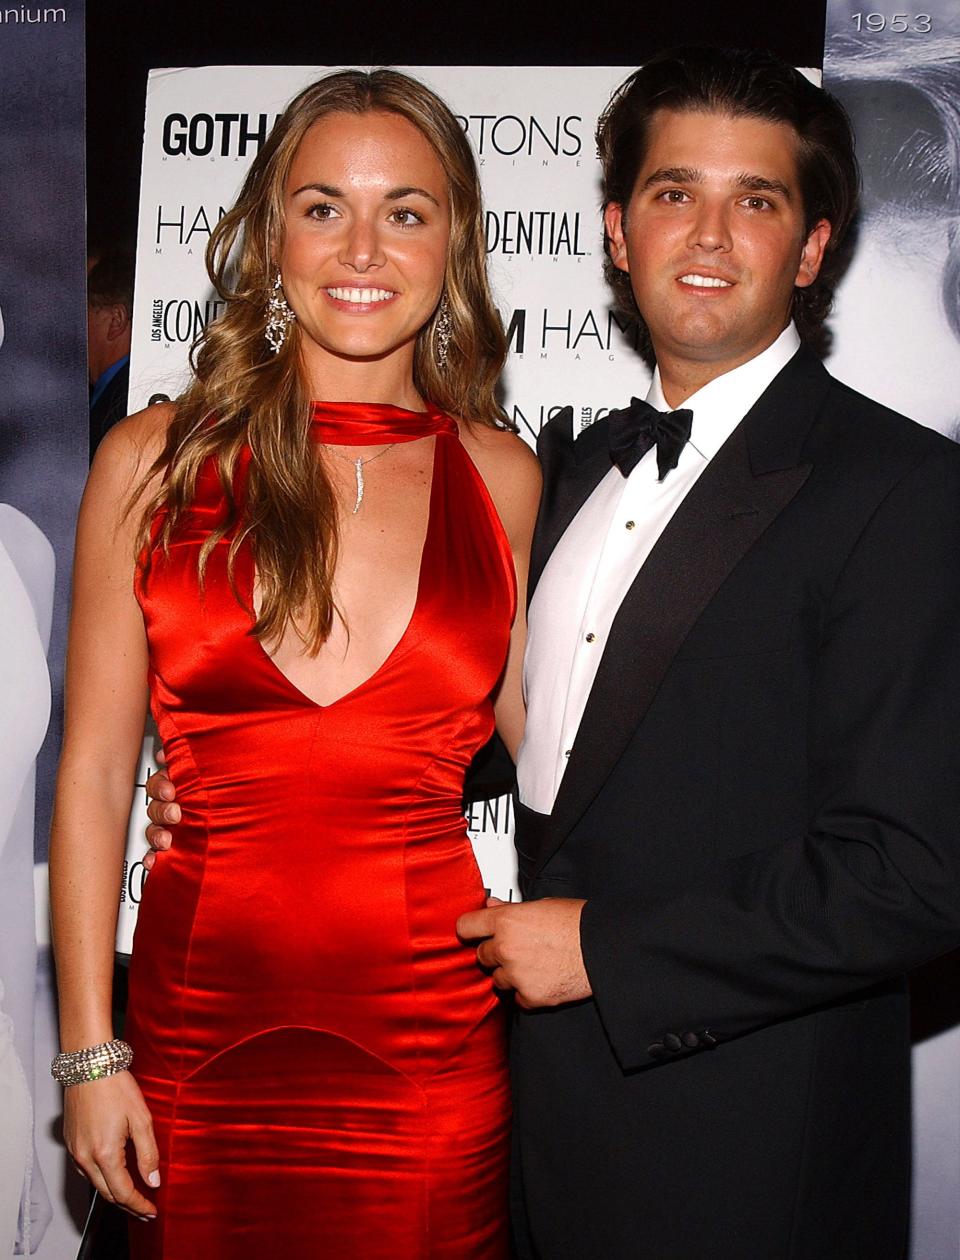 Vanessa Haydon and Donald Trump Jr. during The 53rd Annual Miss USA Competition - After Party - Arrivals at Avalon in Hollywood, California, United States.